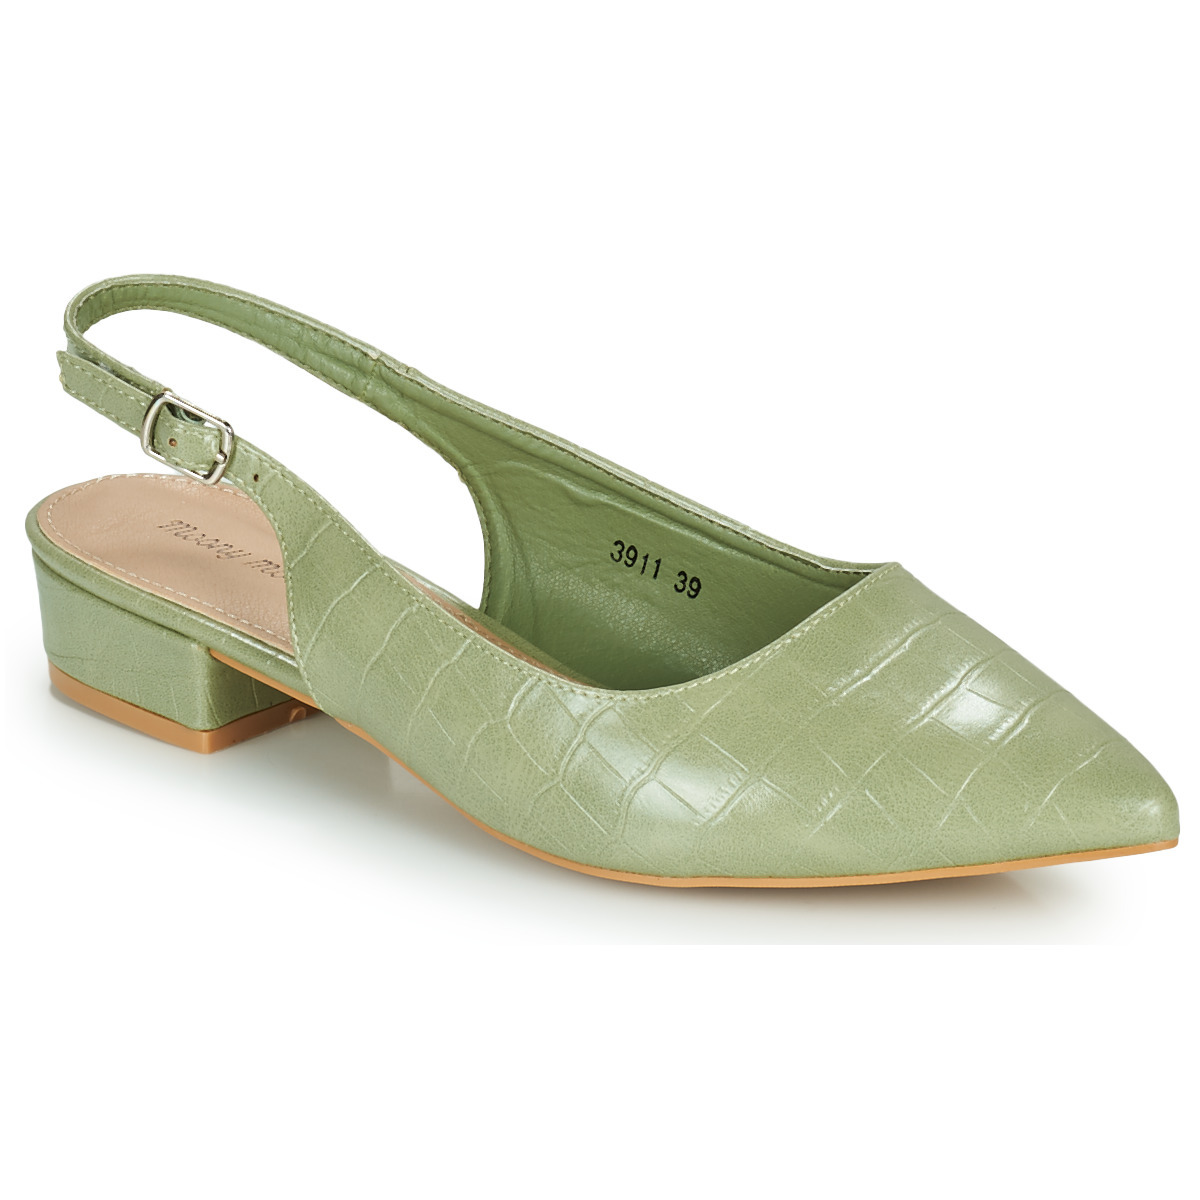 Moony Mood - Pumps in Green for Women from Spartoo GOOFASH